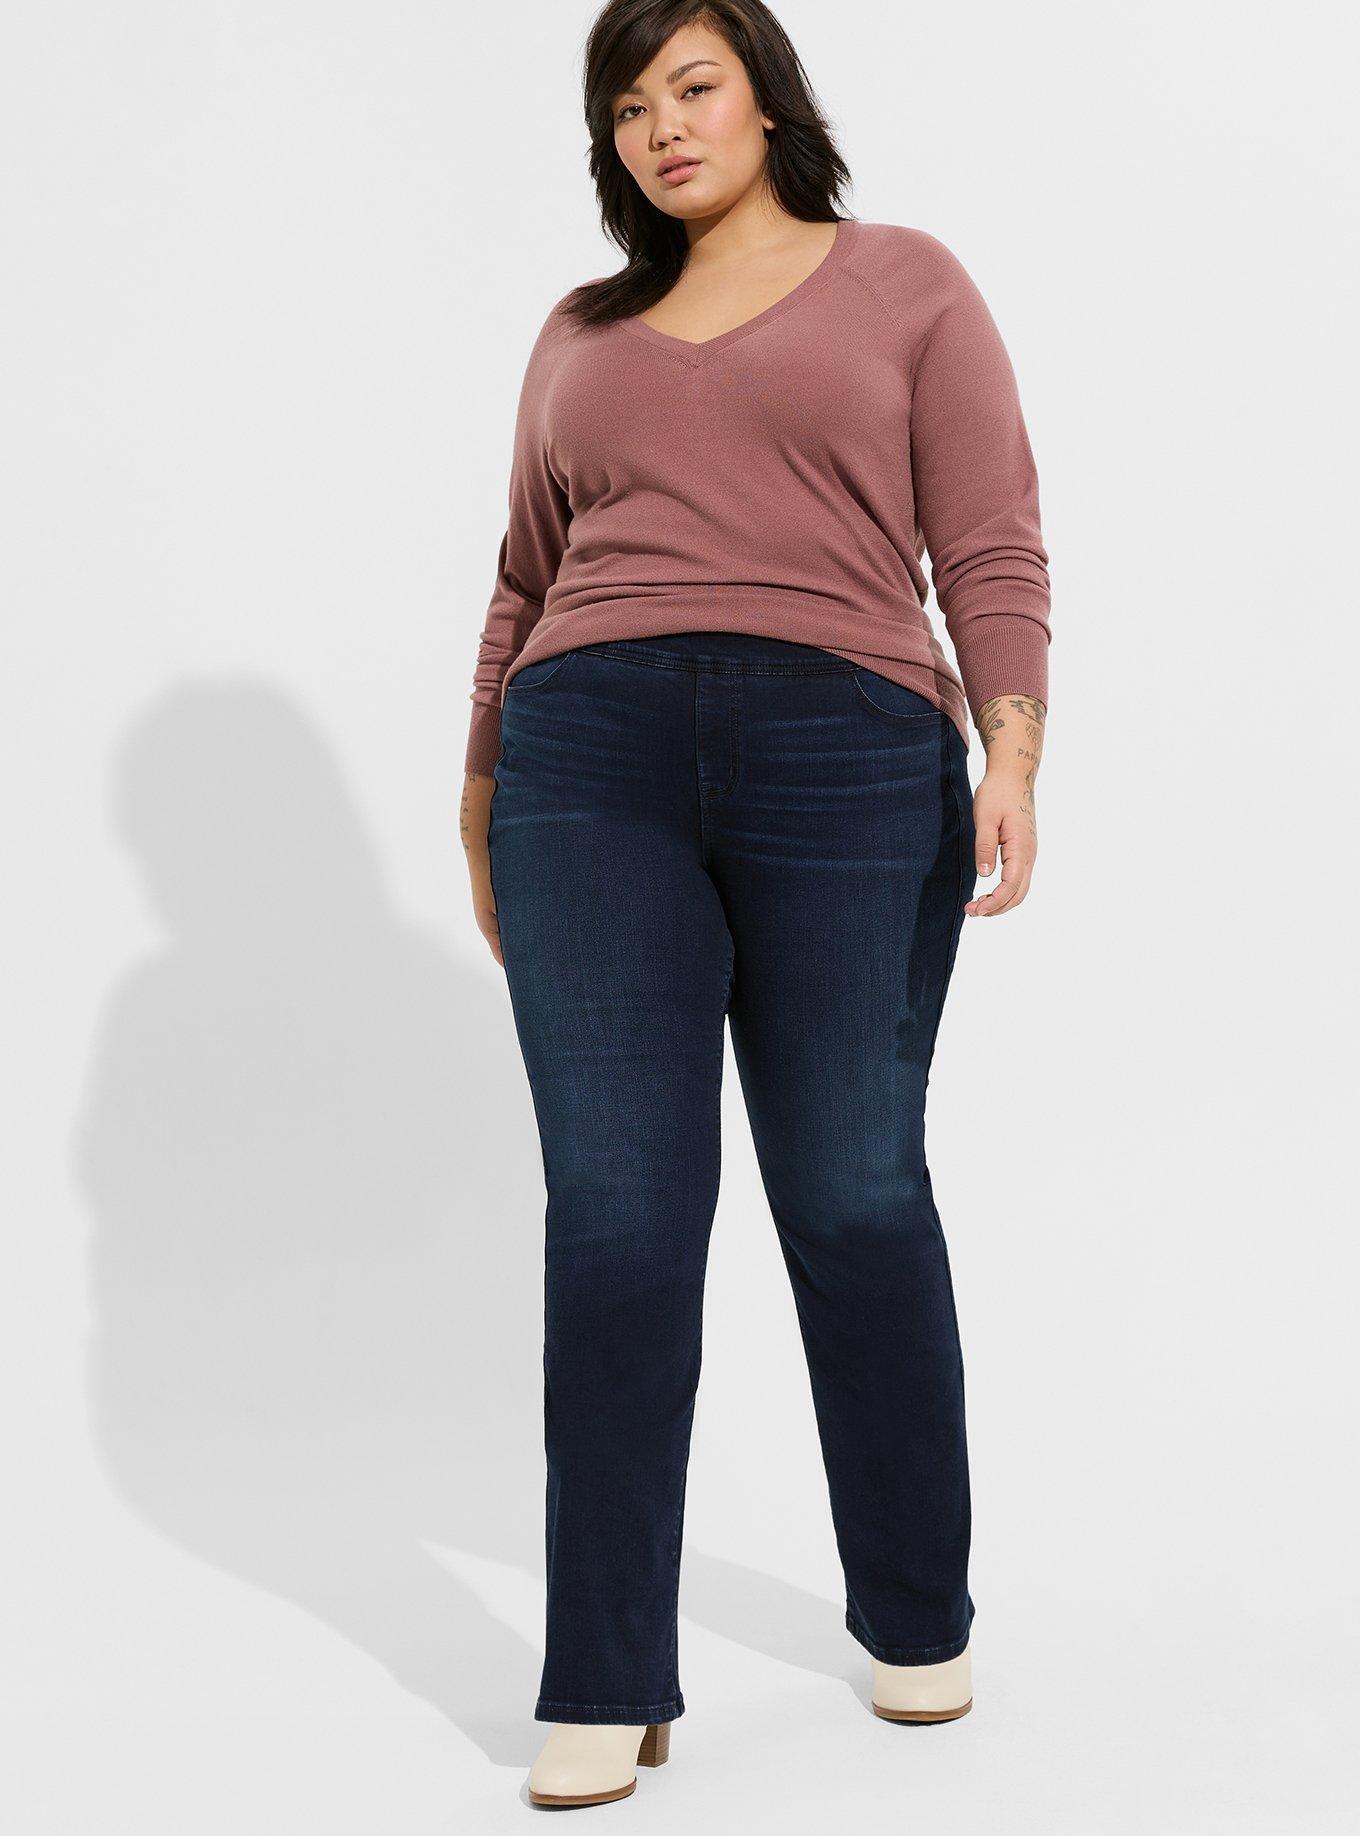 Women's Plus Size Jeans Look Jeggings Stretch High Waisted Denim Skinny  Pull-on Leggings with Pockets (1X-4X)